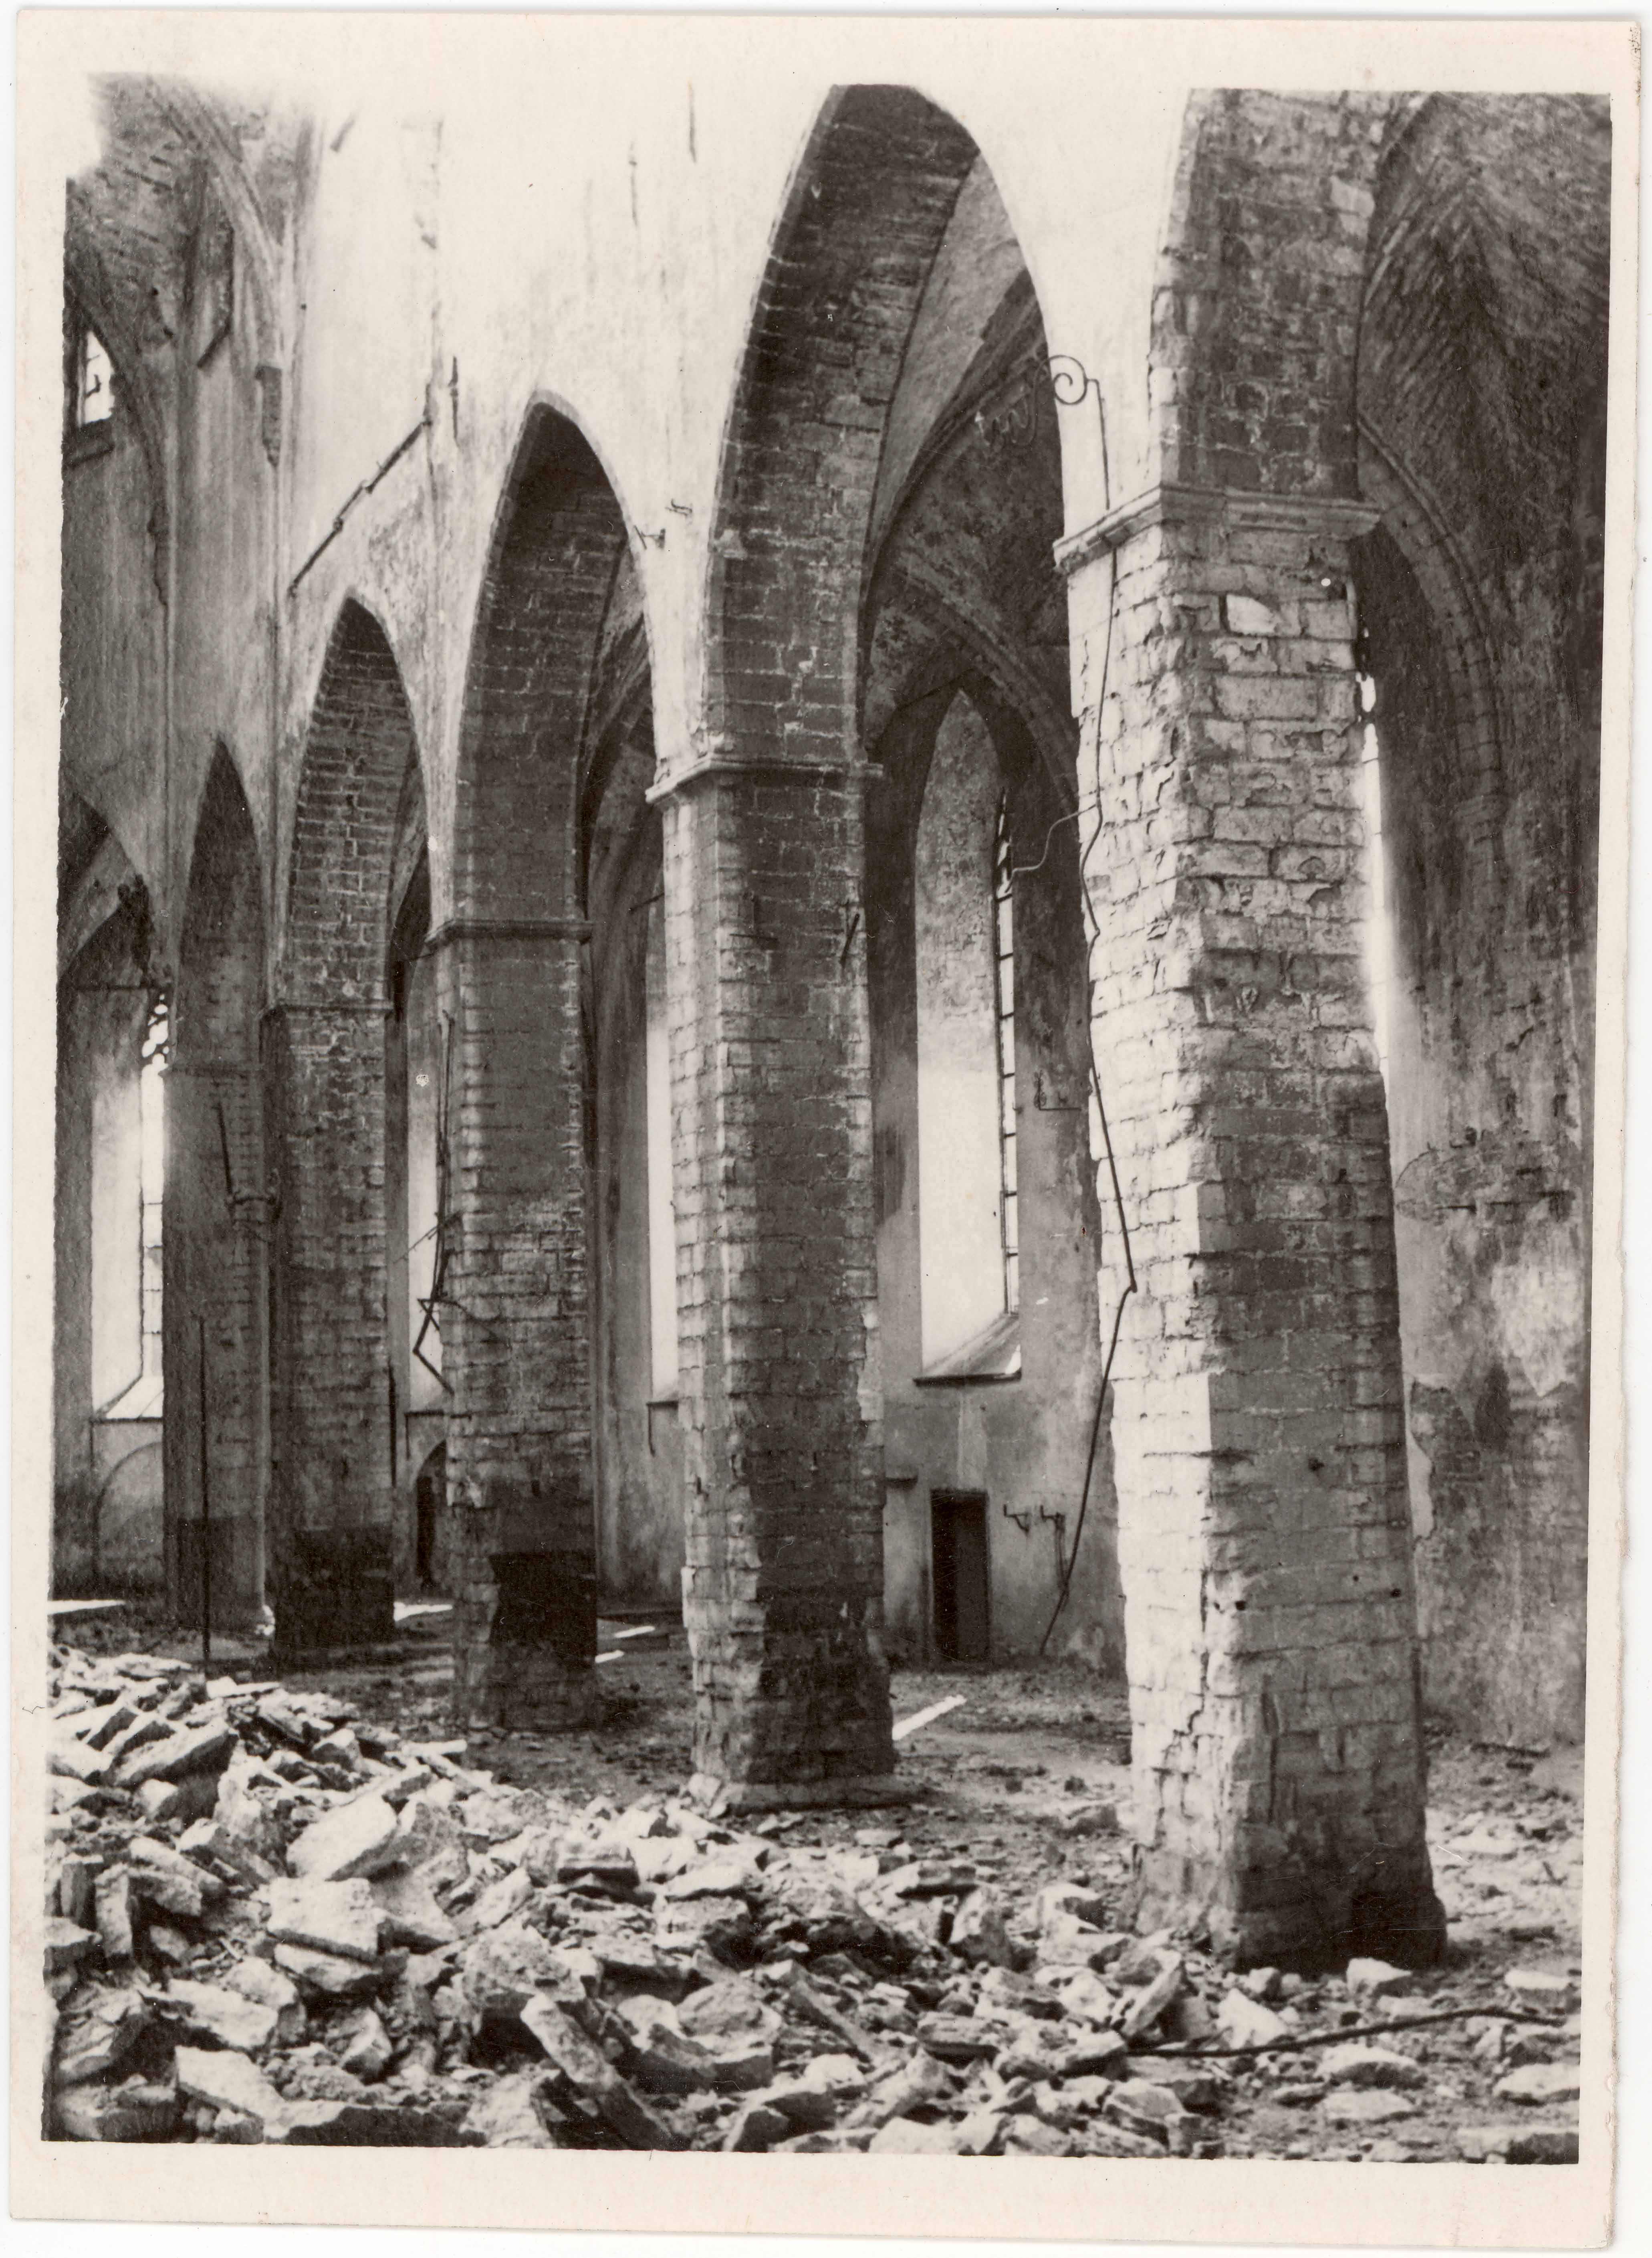 All-city. Niguliste Church. View of the middle robbery of the south side robbery